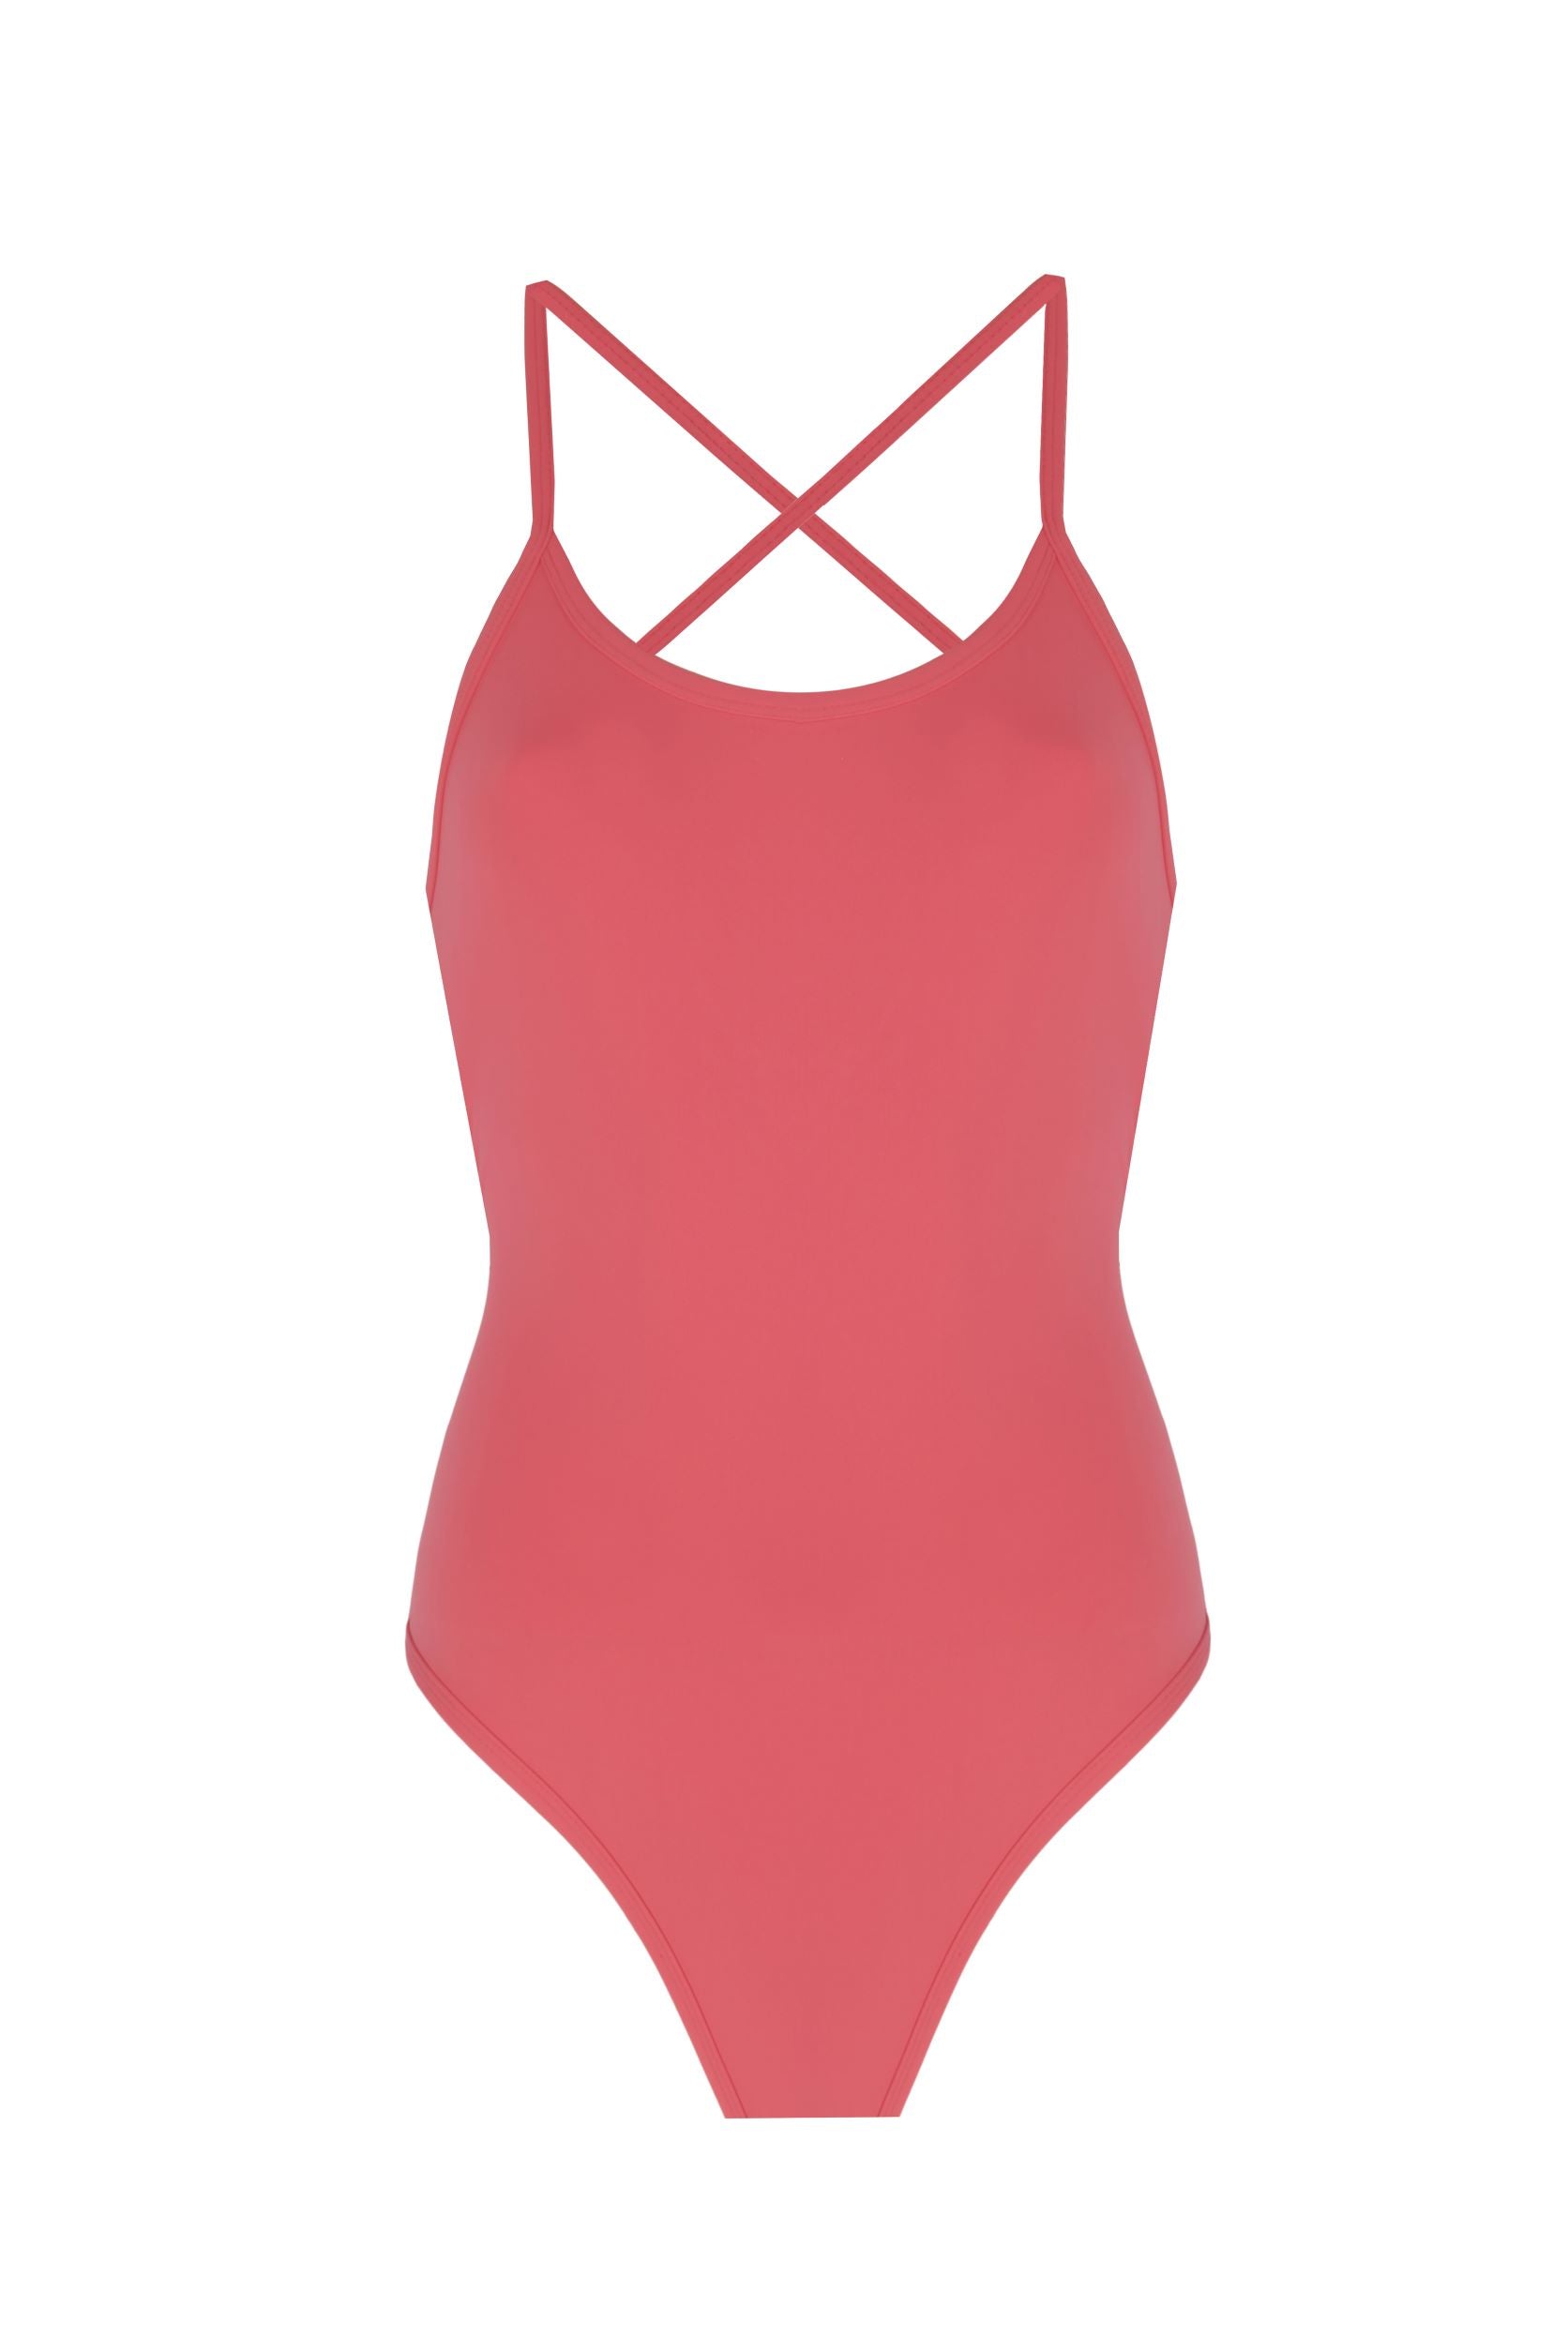 Women's Racer Swimsuit - Multicolour Extra Small Yorstruly